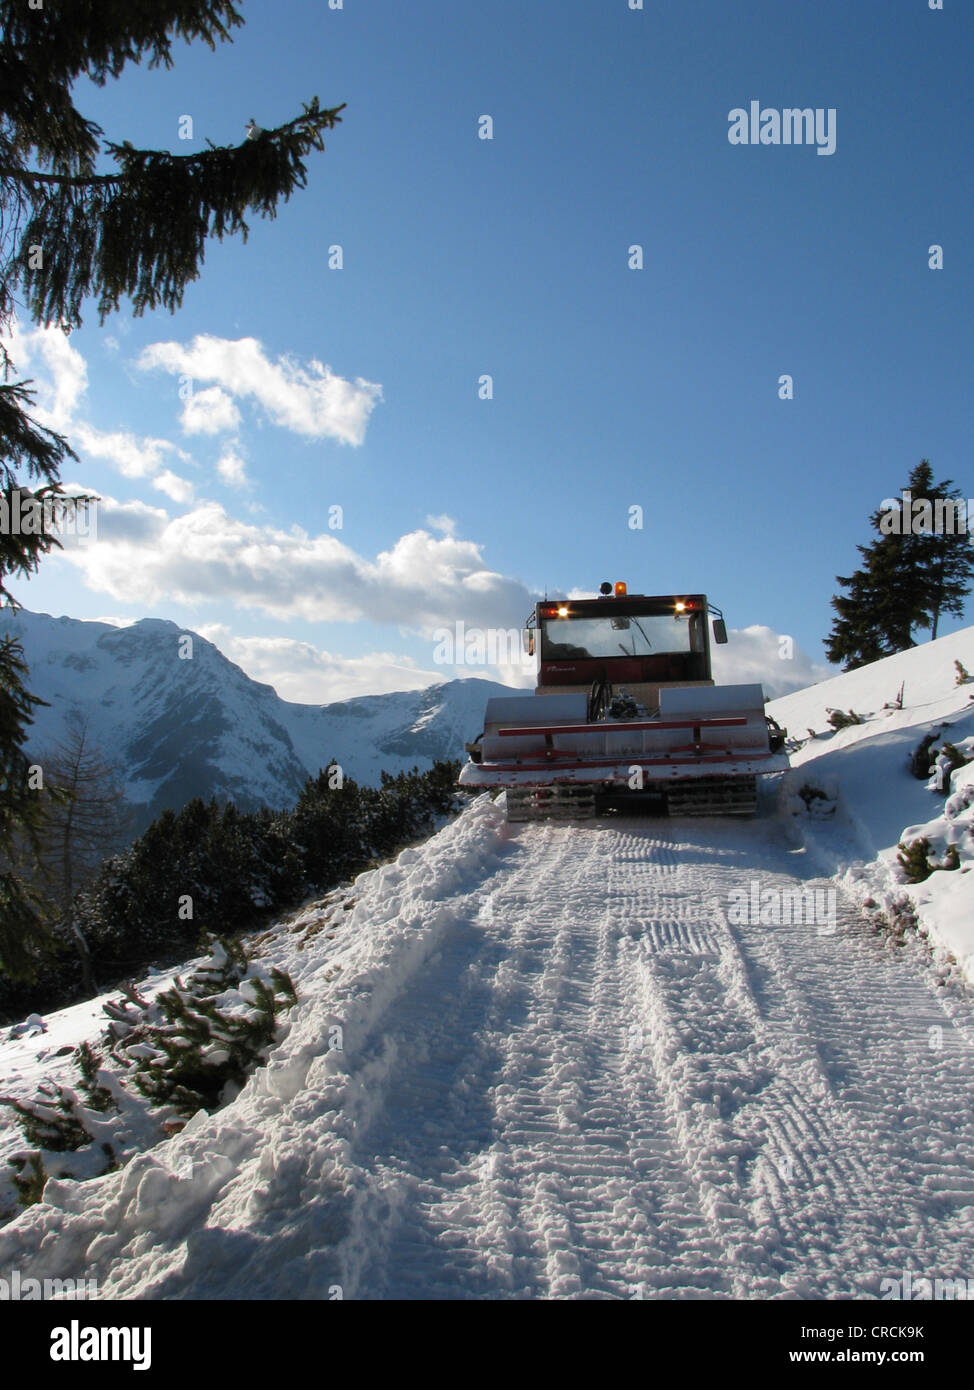 Snow Cat in snowy mountain scenery of a skiing area preparing a footpath, Italy, Suedtirol, Sarentino, Reinswald Stock Photo